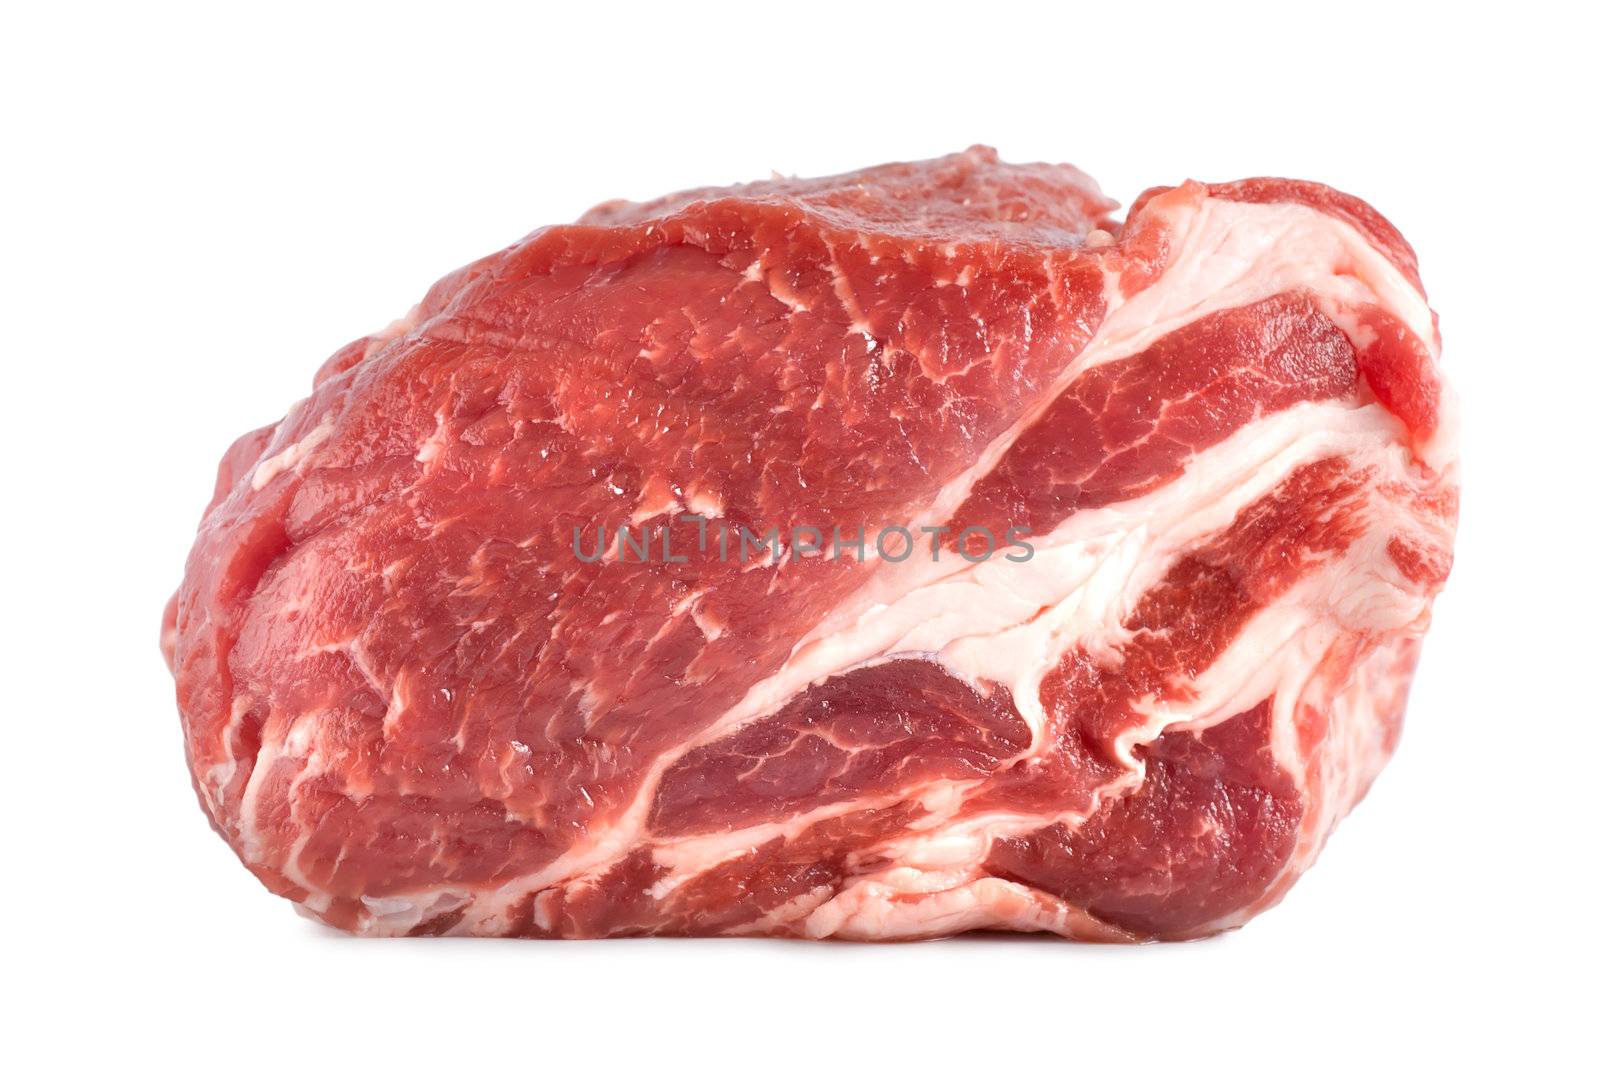 Raw pork isolated on a white background